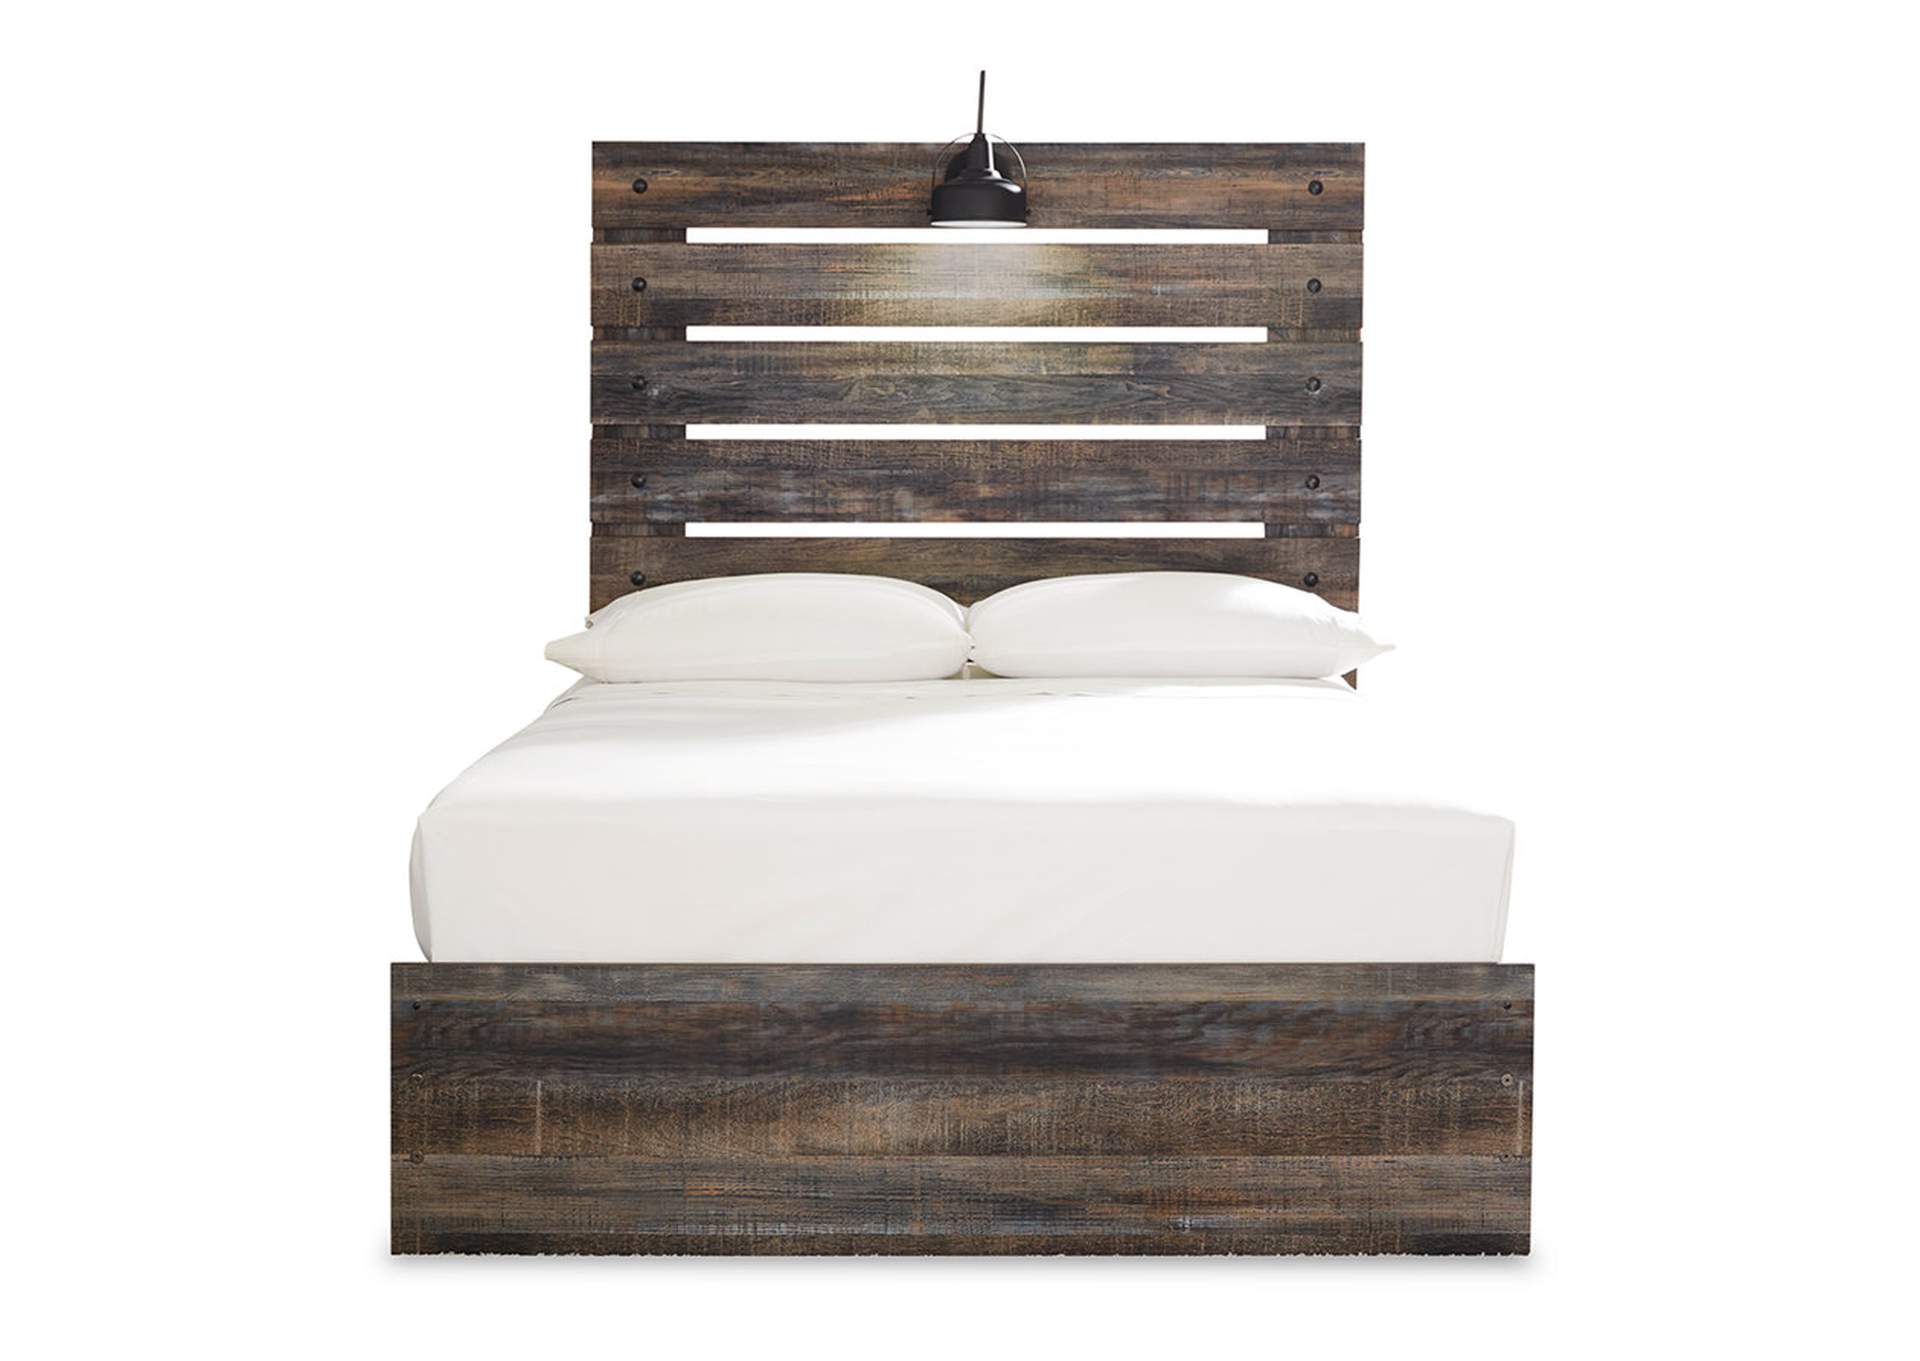 Drystan Full Panel Bed with 2 Storage Drawers,Signature Design By Ashley